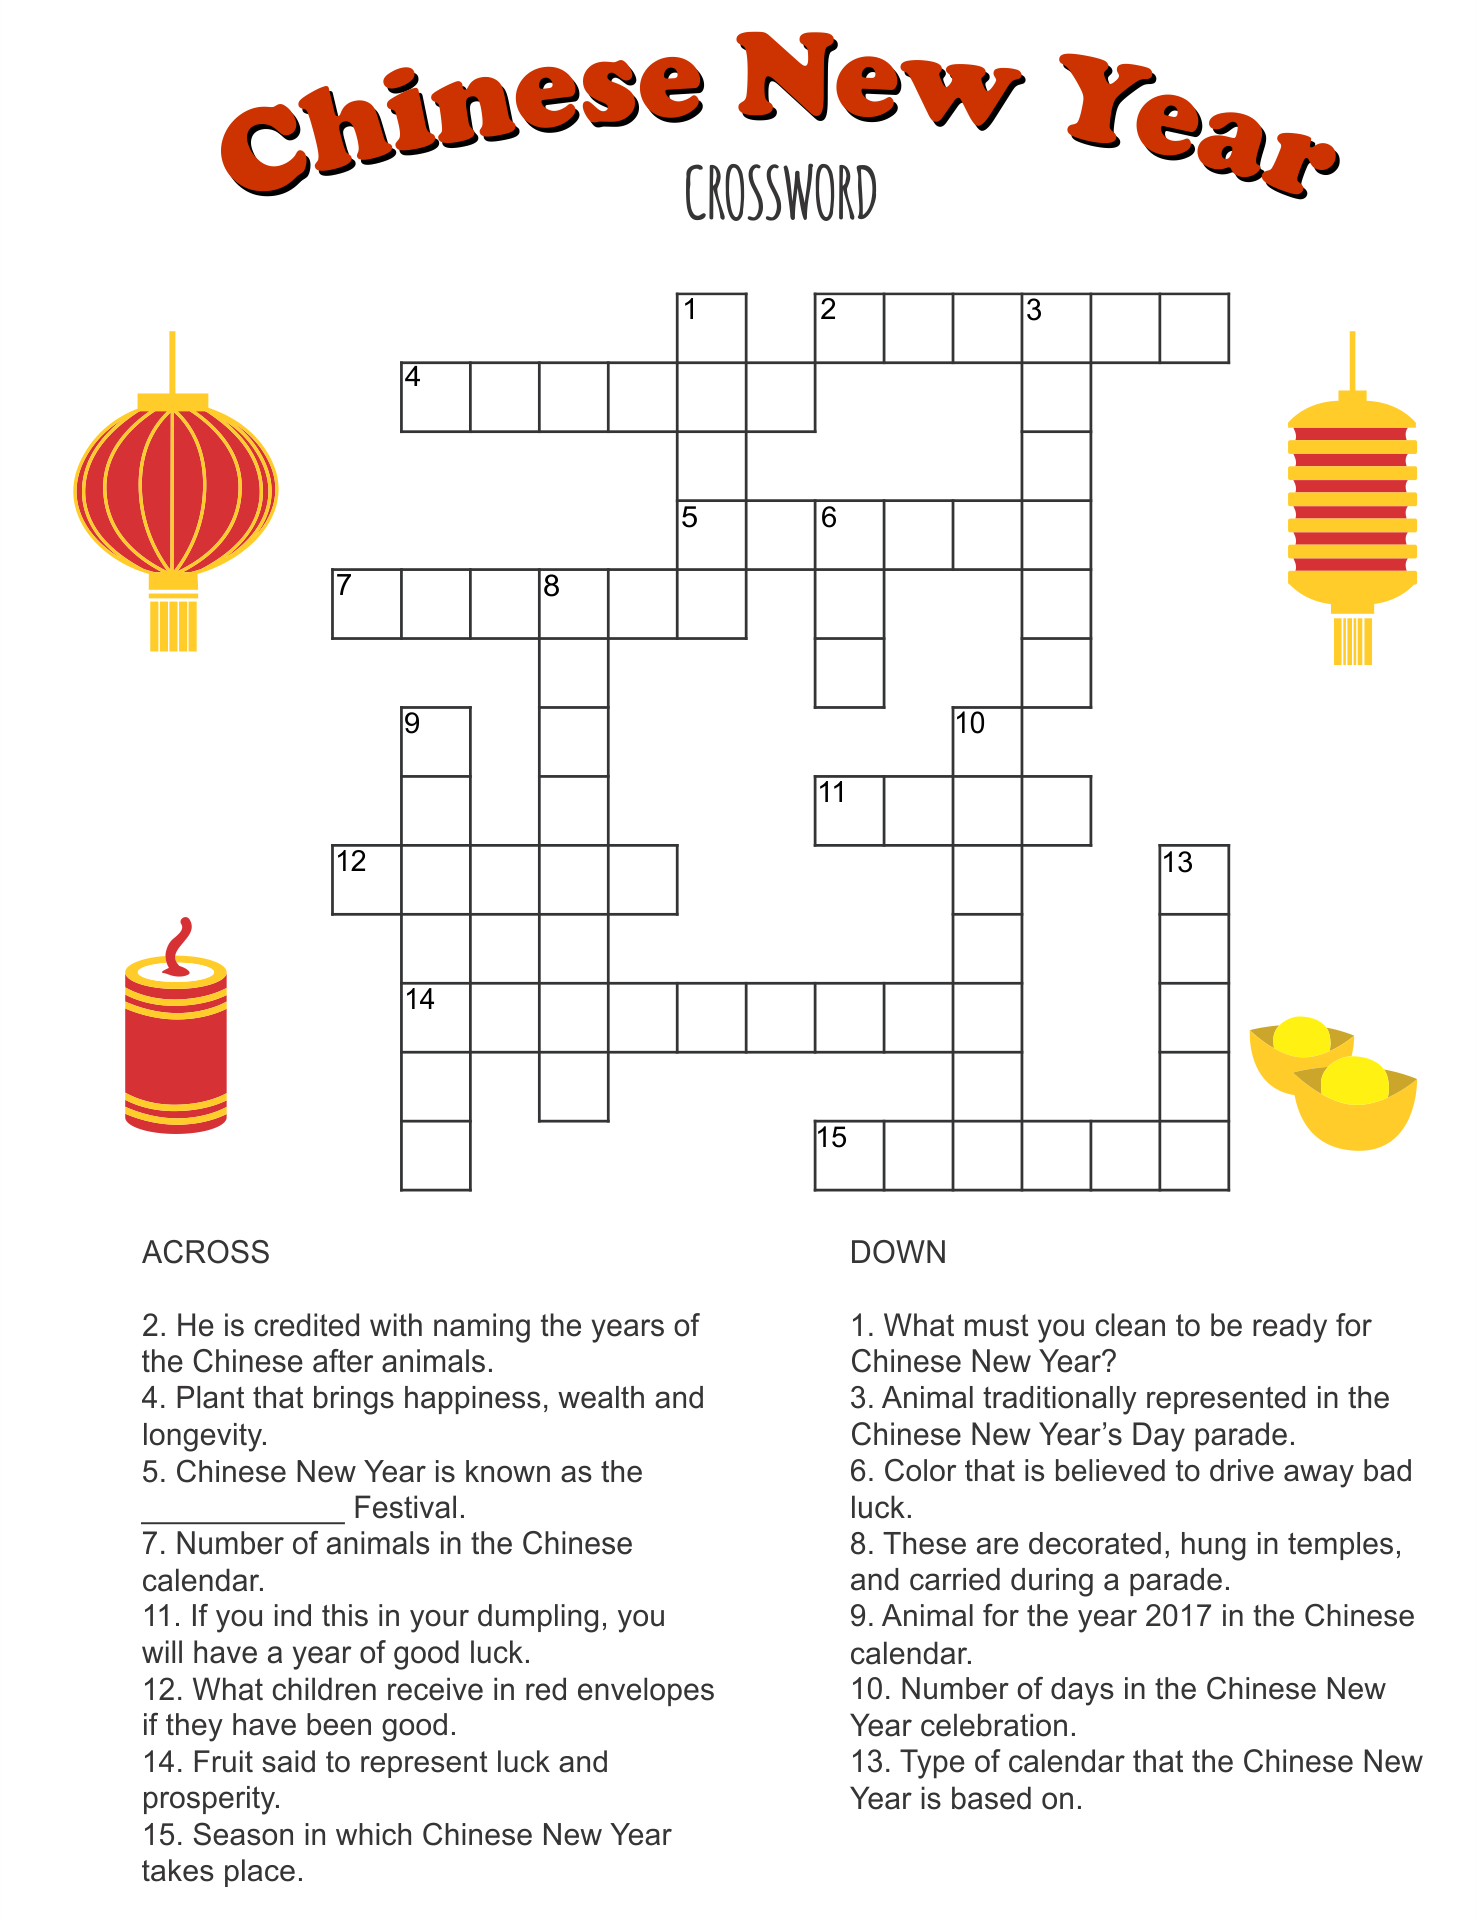 6 Best Images of Easy Printable Puzzles - Free Printable Easy Crossword